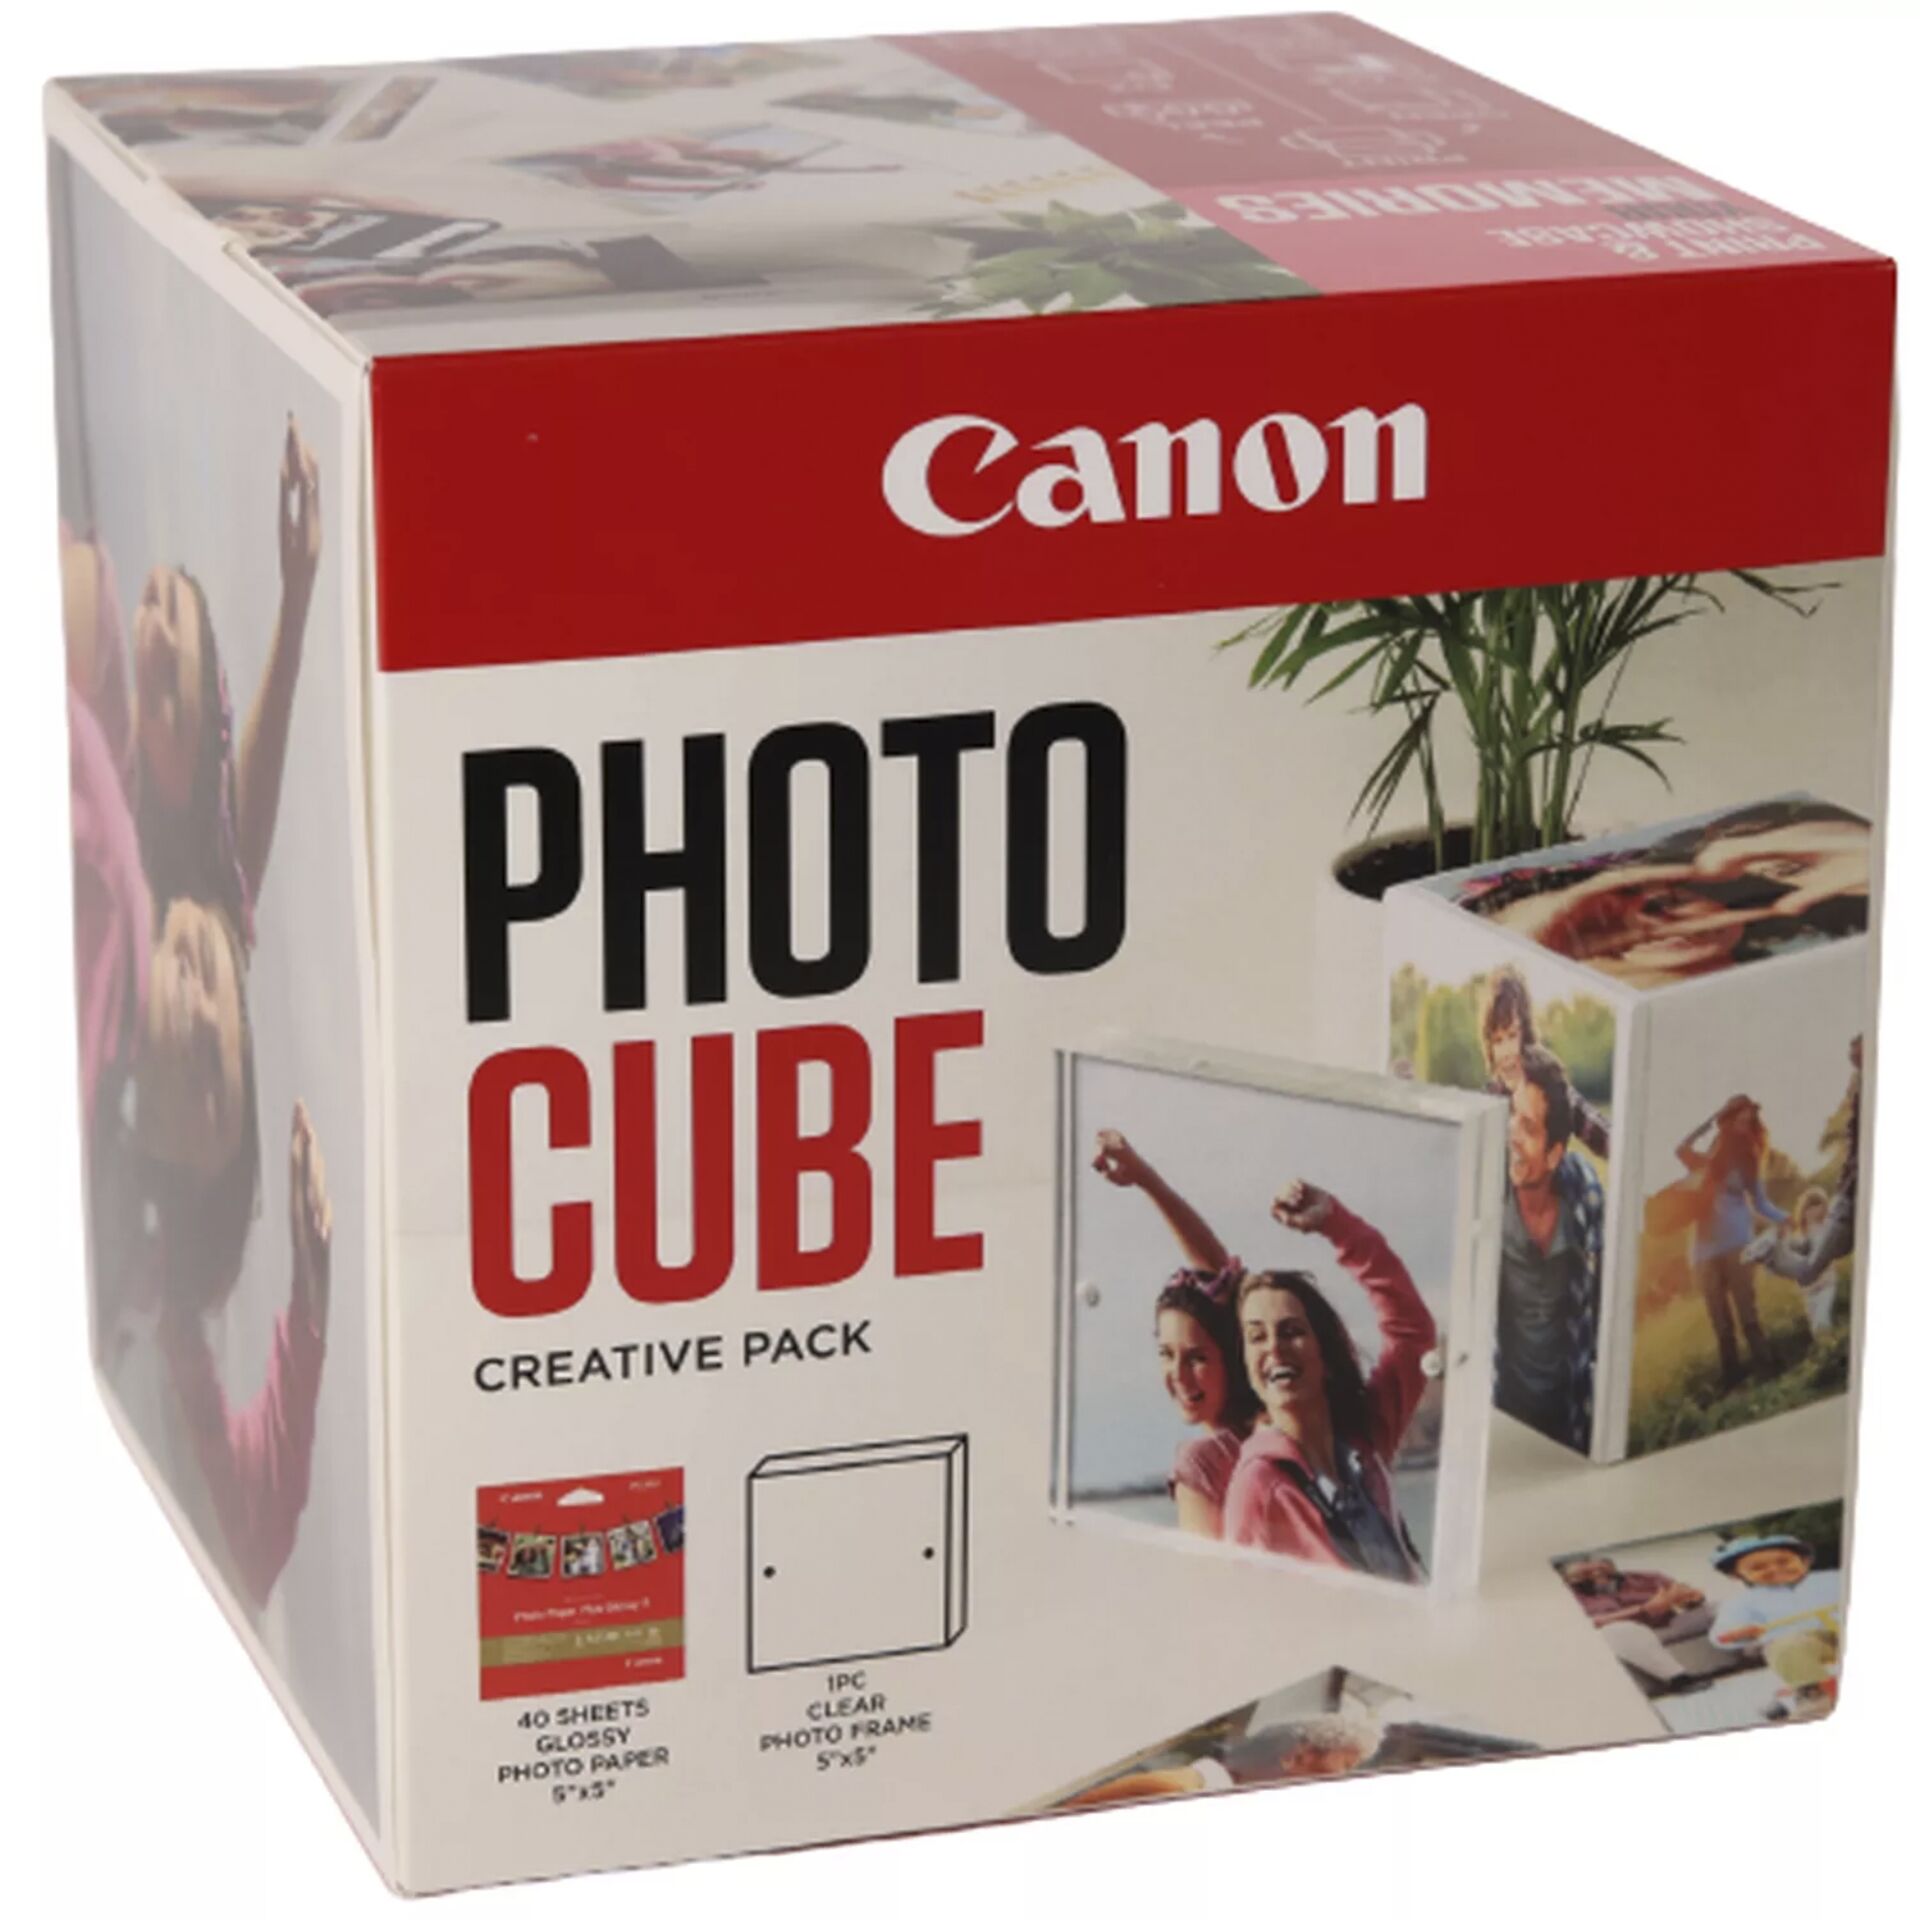 Canon PP-201 13x13 cm Photo Cube pacch.creativo bianco Pink